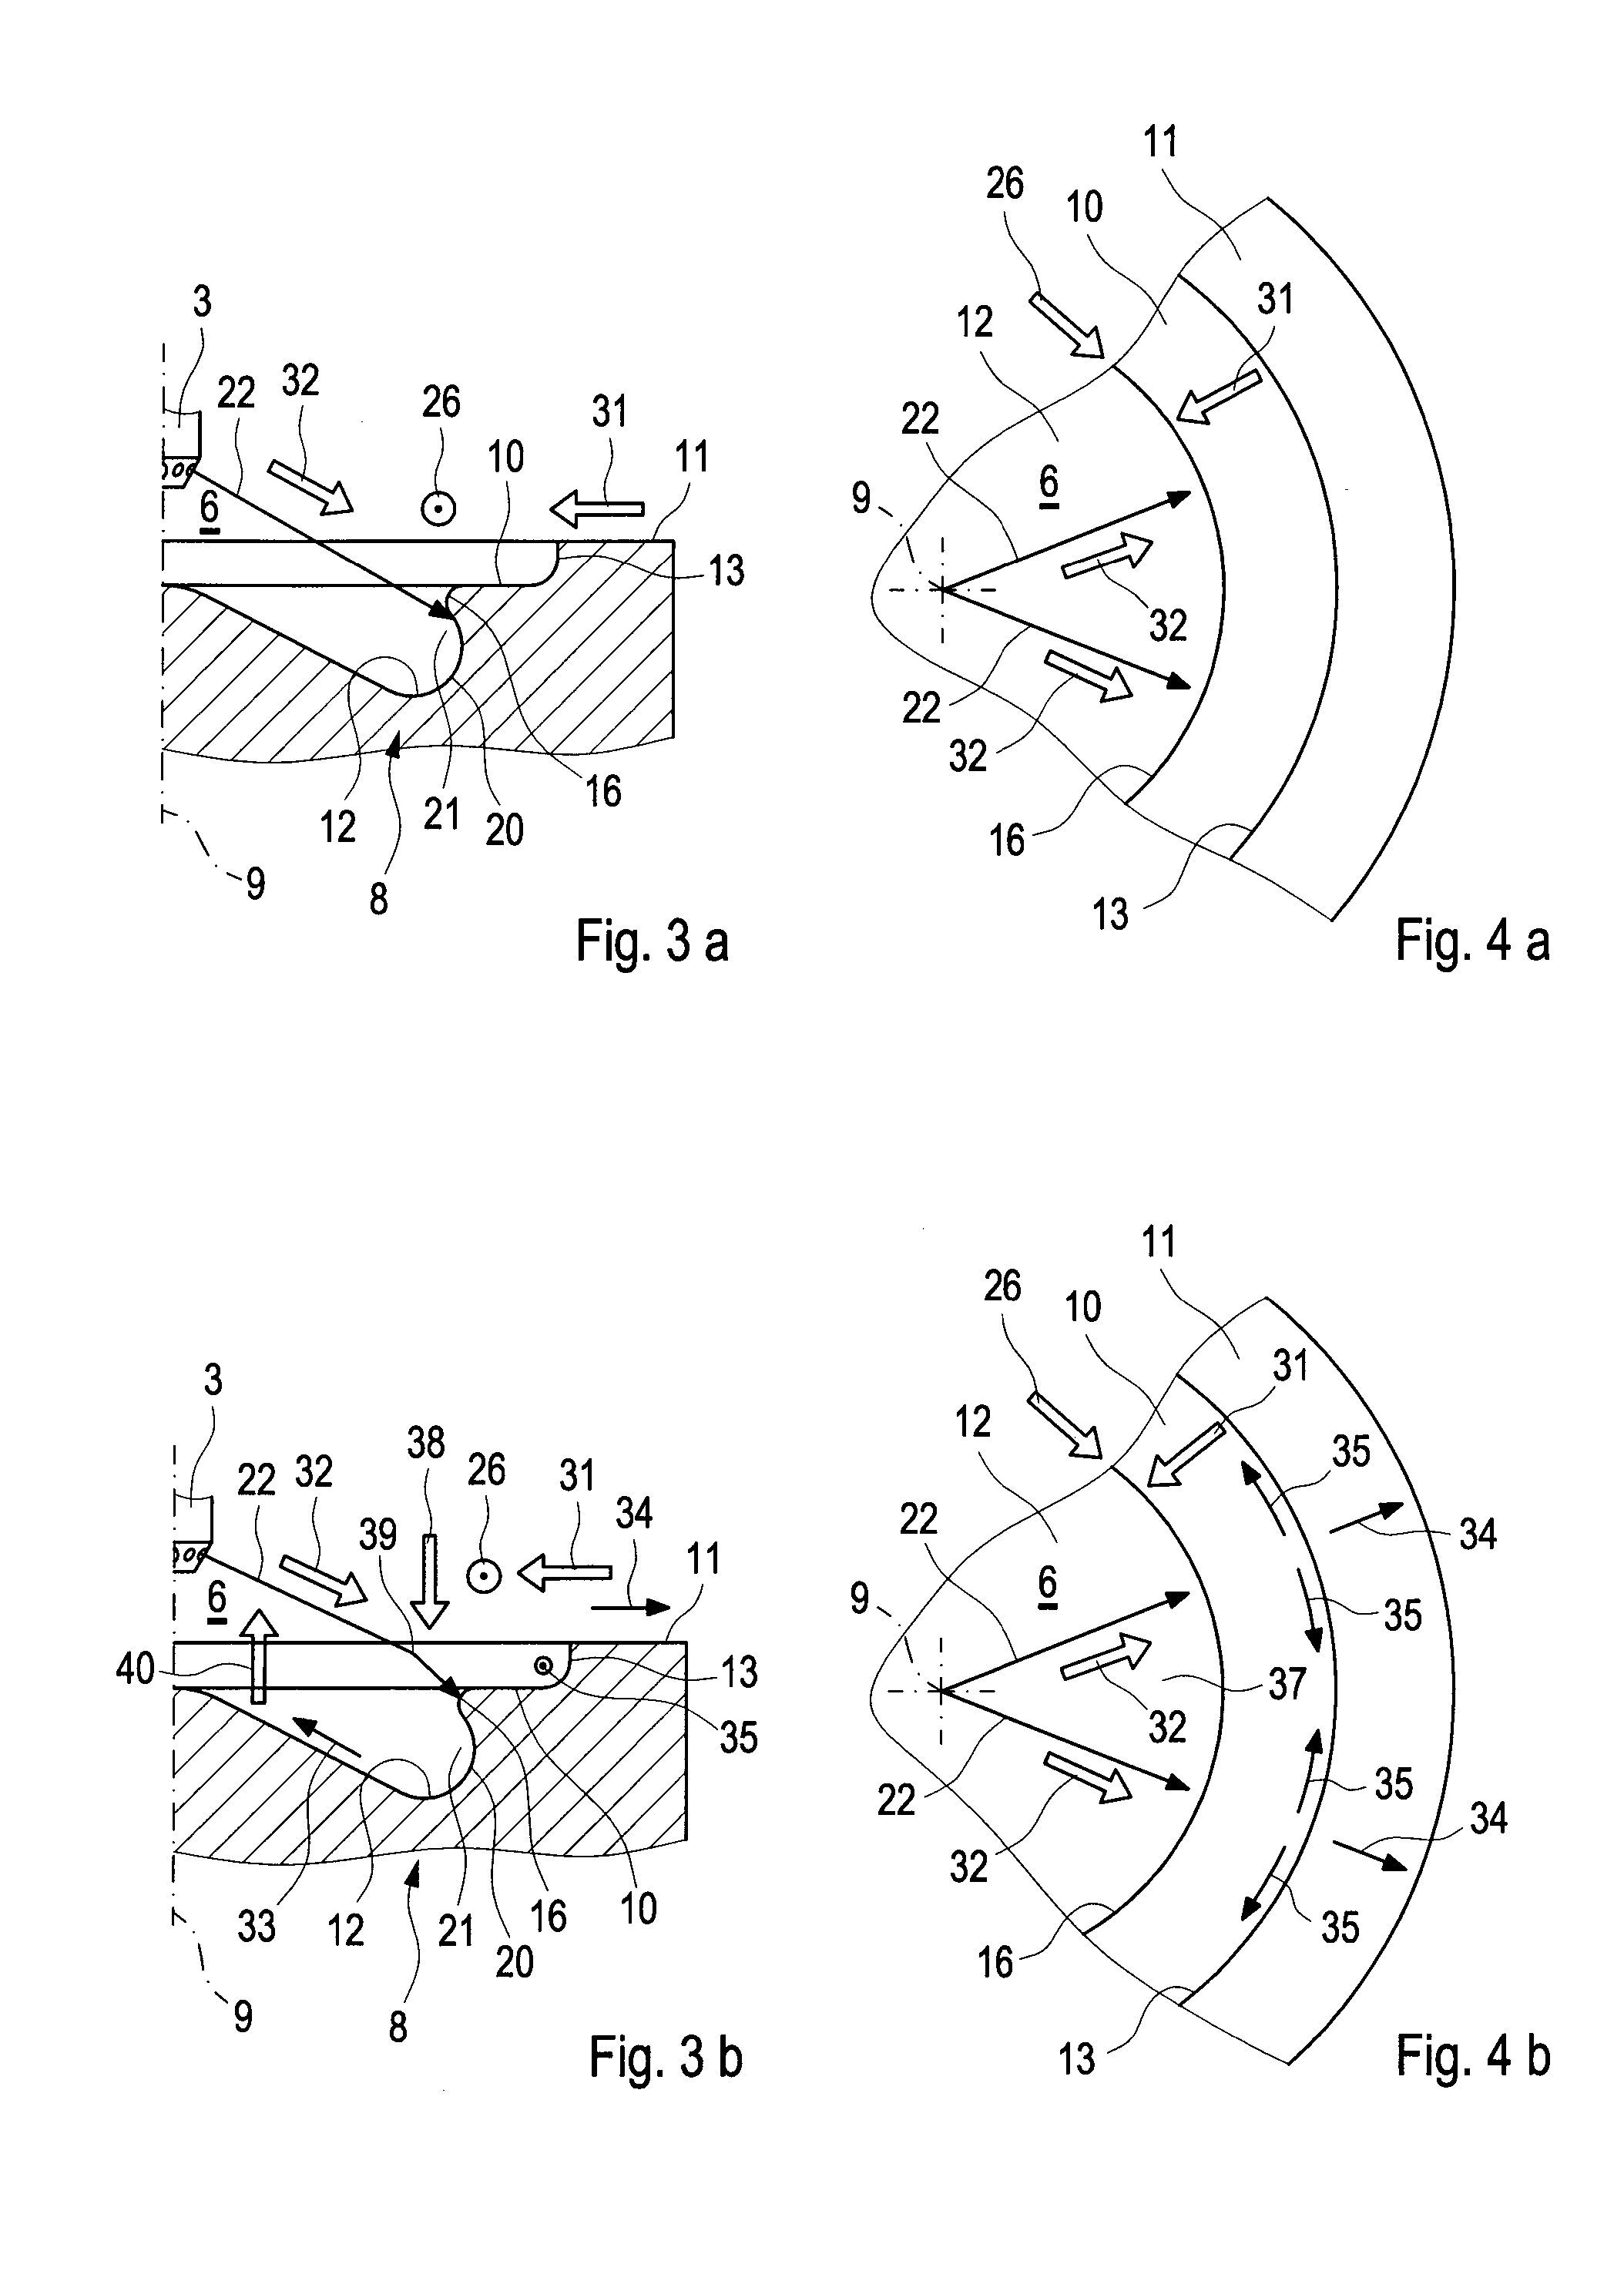 Combustion Method and Internal Combustion Engine